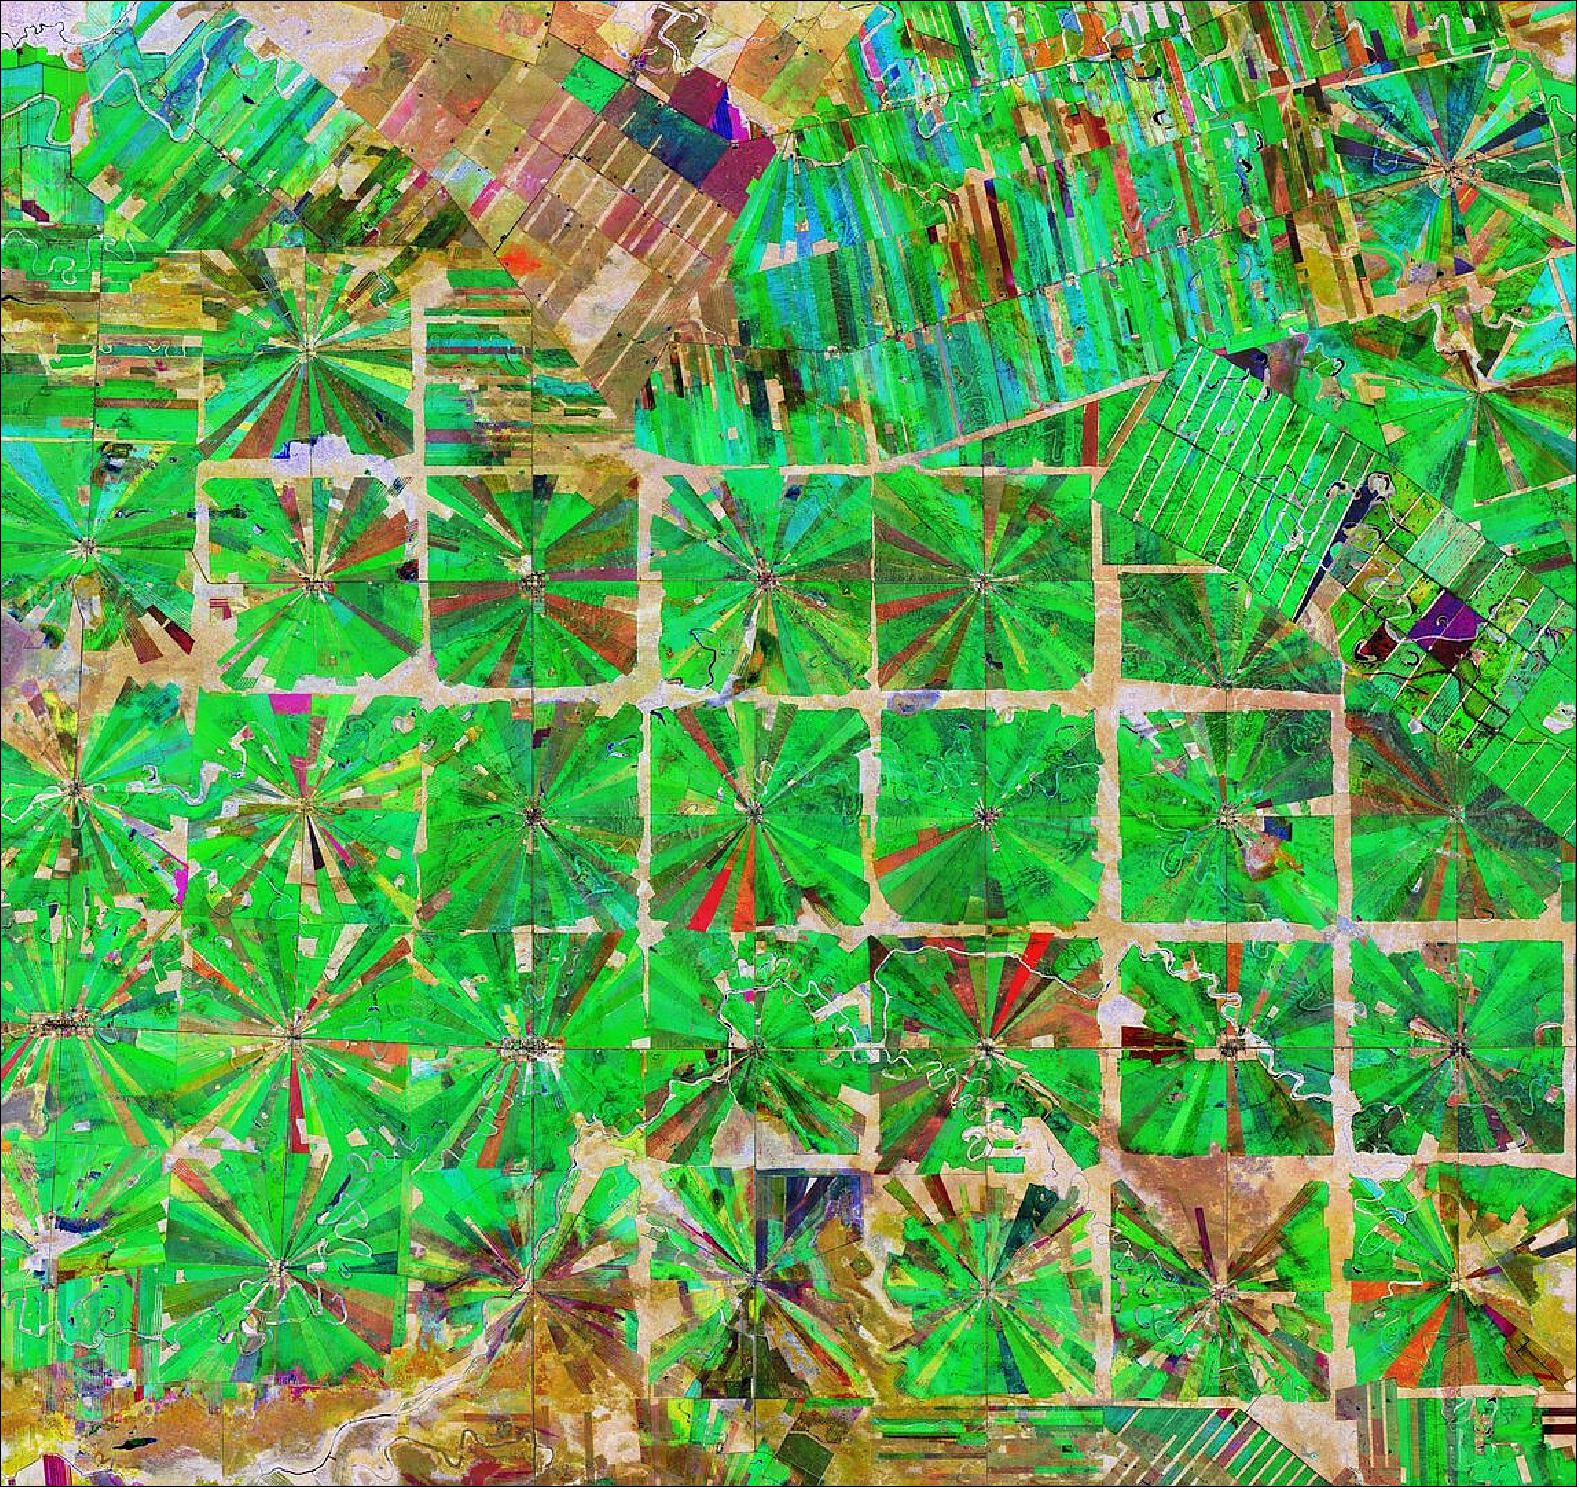 Figure 64: This composite image was created by combing three separate ‘Normalized Difference Vegetation Index’ images from the Copernicus Sentinel-2 mission. The first image, from 8 April 2019, is visible in red; the second from 22 June 2019, can be seen in green; and the third from 5 September 2019 can be seen in blue. The Normalized Difference Vegetation Index is widely used in remote sensing as it gives scientists an accurate measure of healthy and status of plant growth. This image is also featured on the Earth from Space video program (image credit: ESA, the image contains modified Copernicus Sentinel data (2019), processed by ESA, CC BY-SA 3.0 IGO)